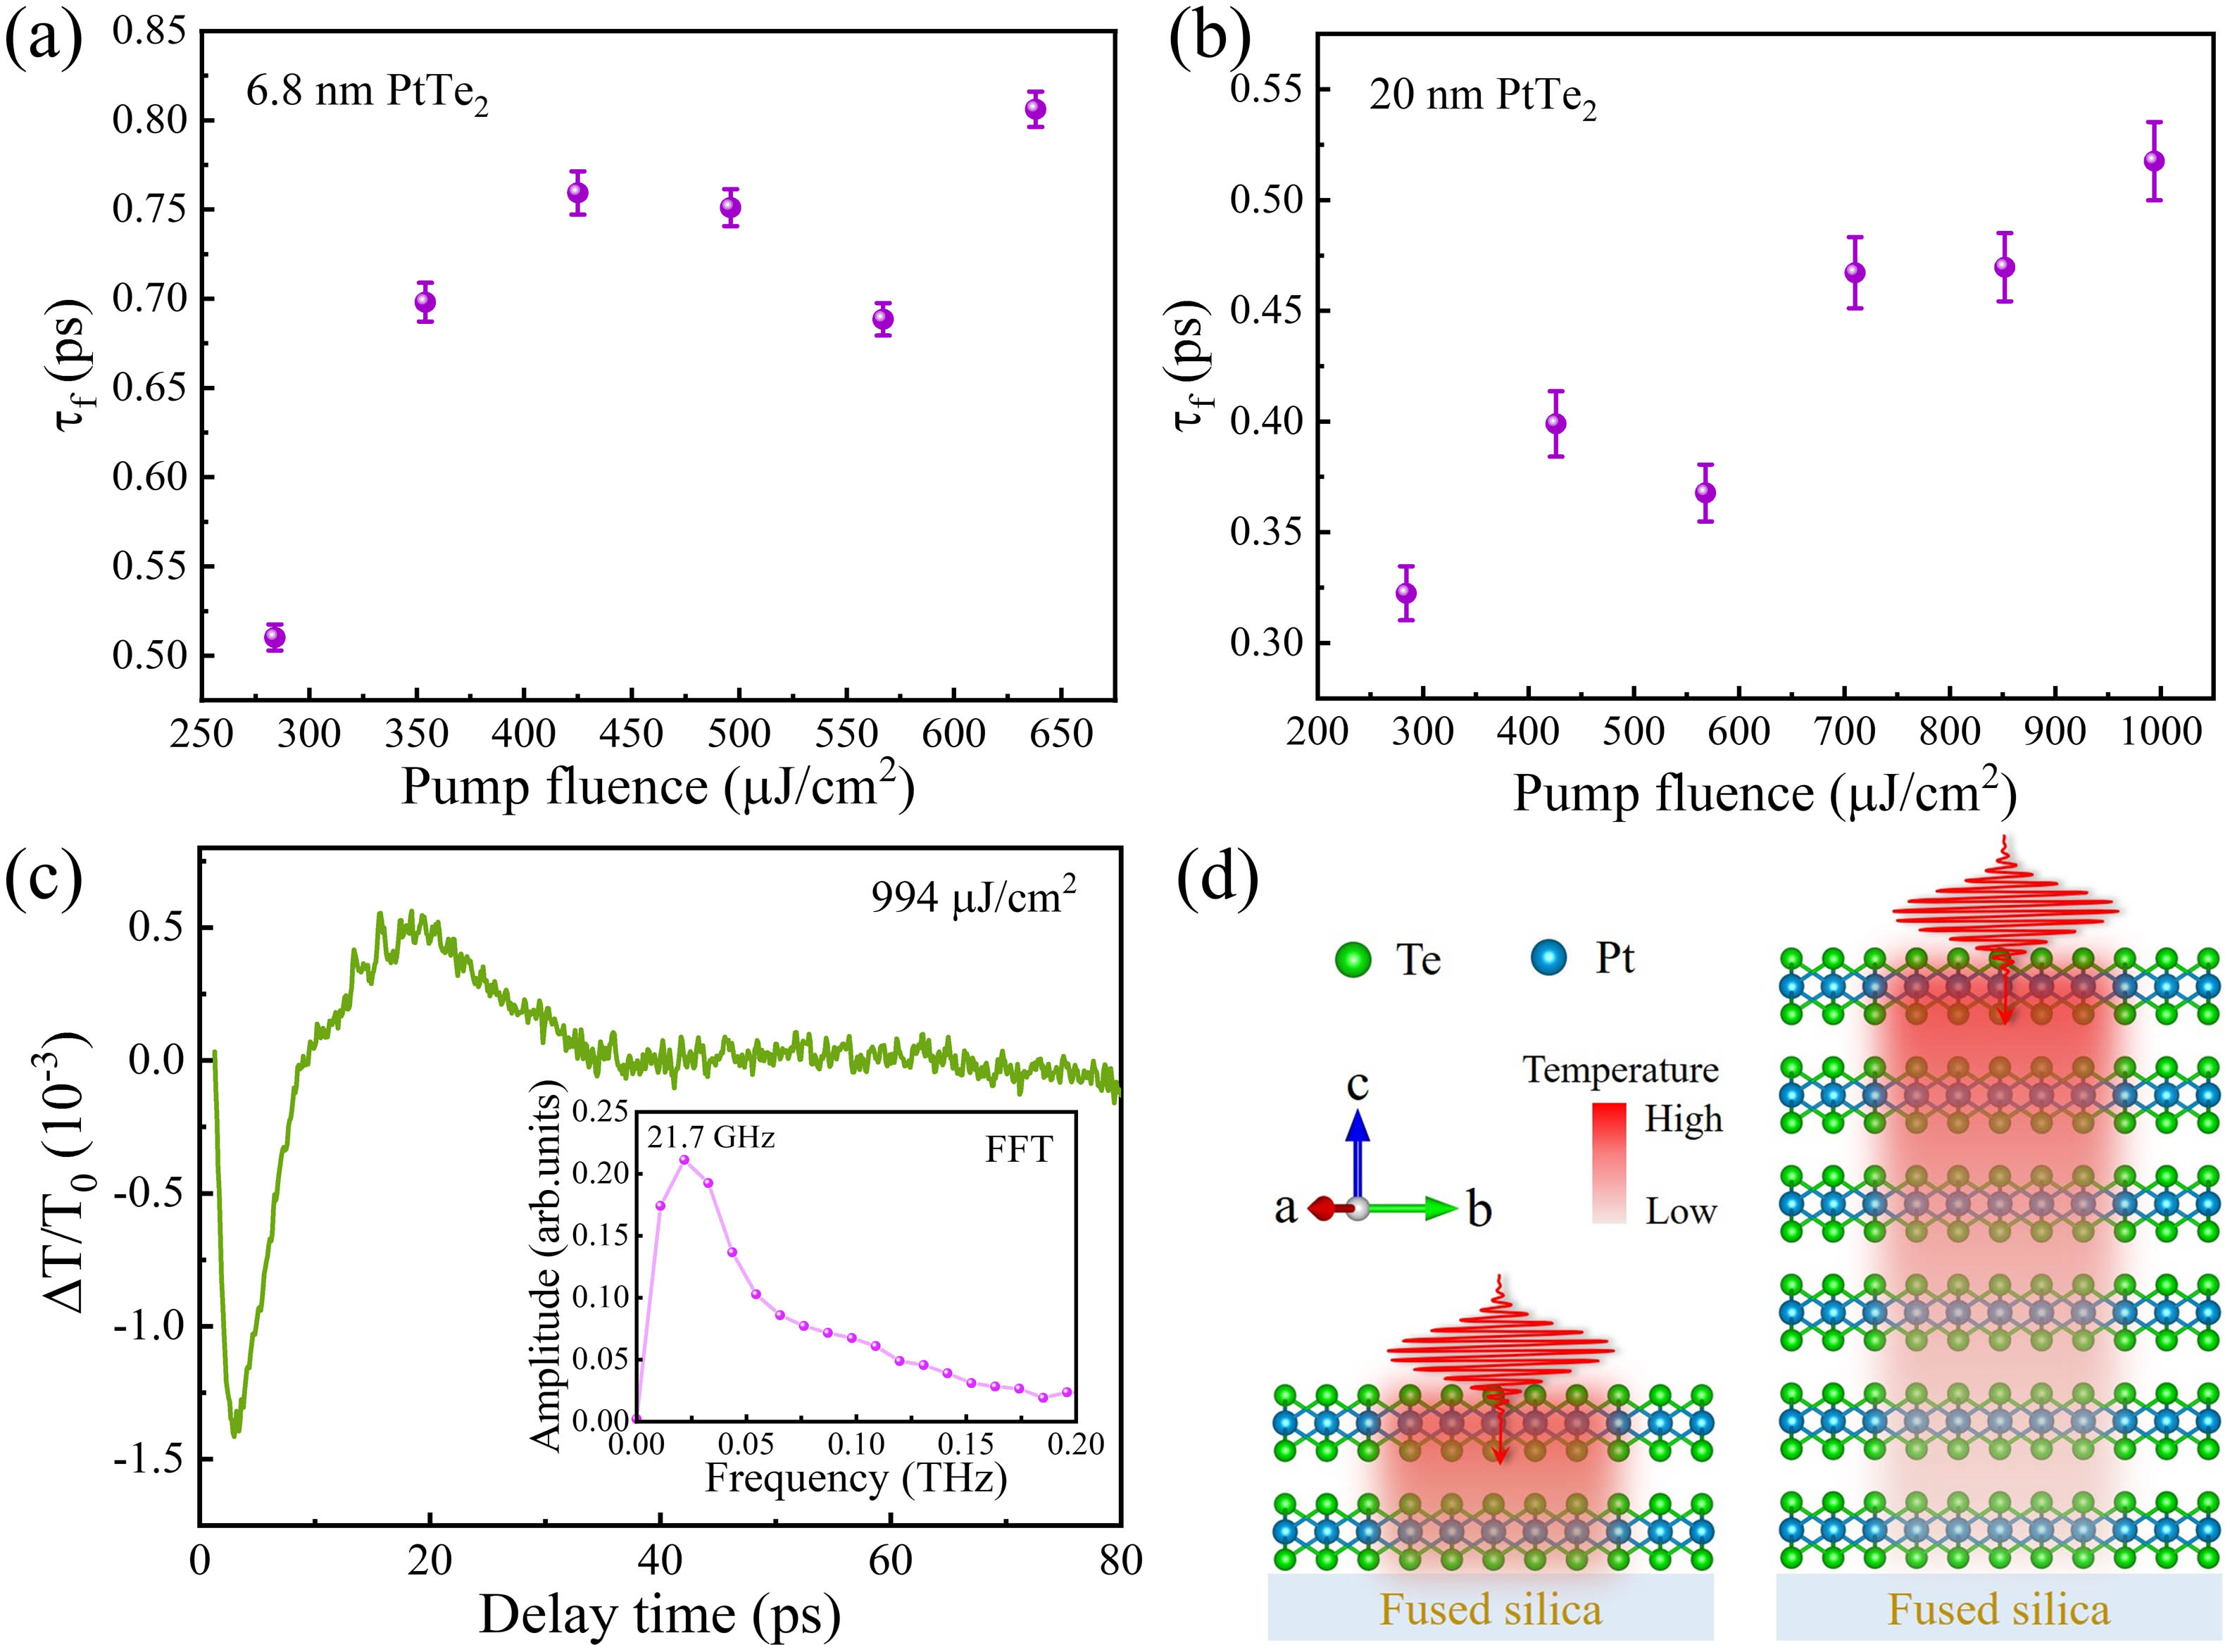 Fitting fast lifetime τf of (a) 6.8 nm and (b) 20 nm PtTe2 with a convoluted biexponential decay function with respect to pump fluence. (c) The extracted coherent acoustical phonon oscillatory signal by subtracting the fitted incoherent carrier dynamics from total transient trace under pump fluence of 994 μJ/cm2. Inset shows the frequency domain after FFT. (d) Schematic diagrams of CAP generation induced by temperature gradient. The left and right drawings respectively express the temperature response of 6.8 and 20 nm PtTe2 films upon laser irradiation.